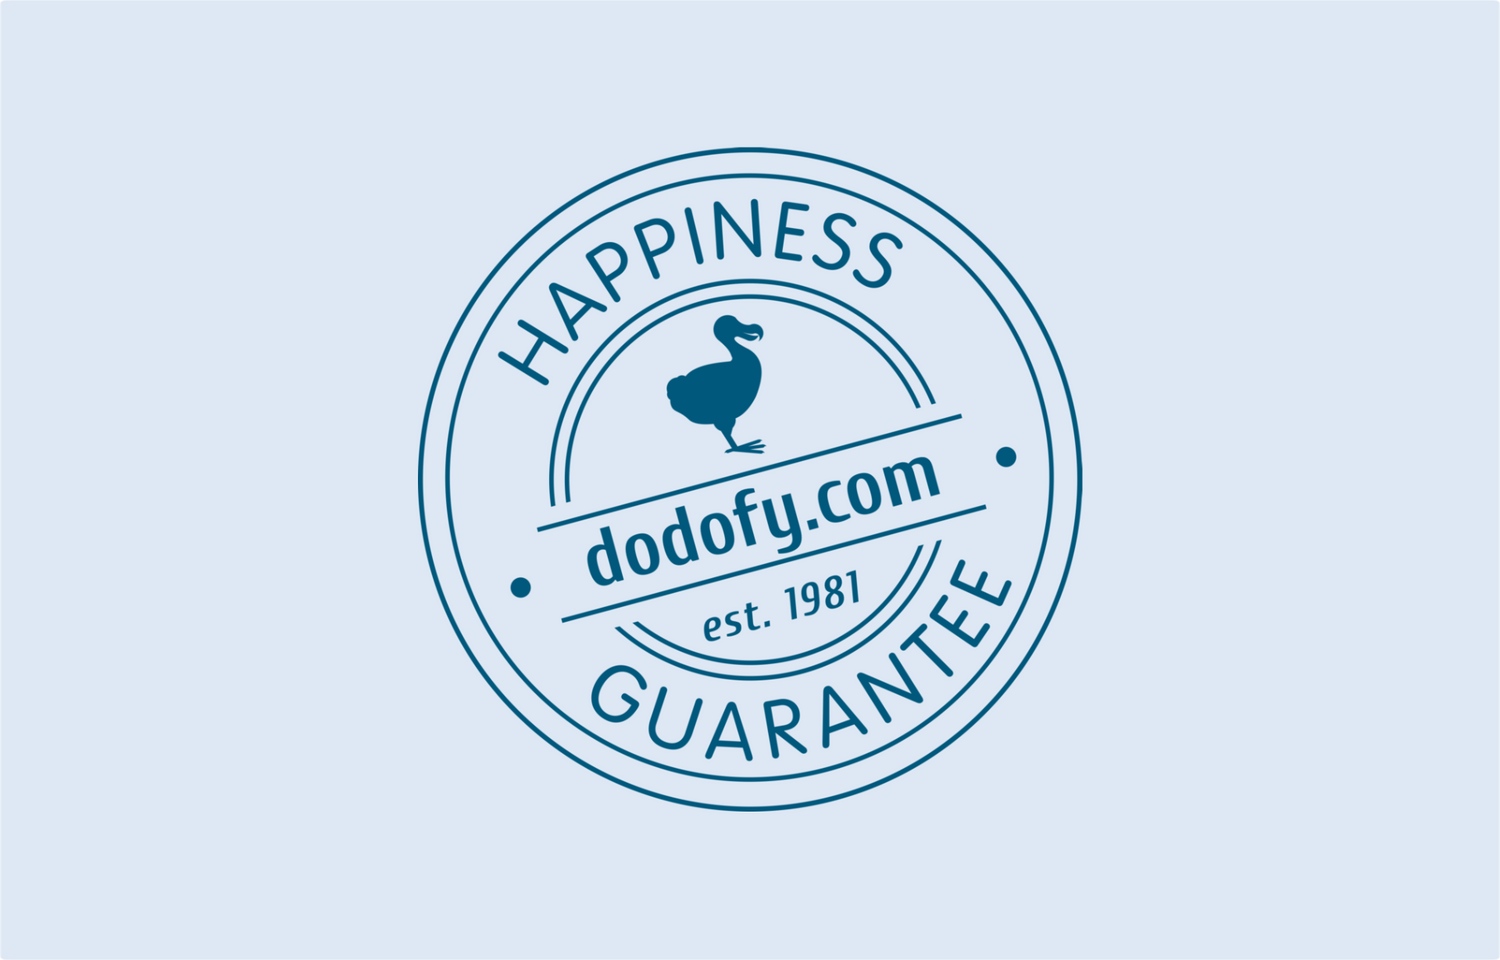 Customer Happiness - Shop our Care Labels with confidence